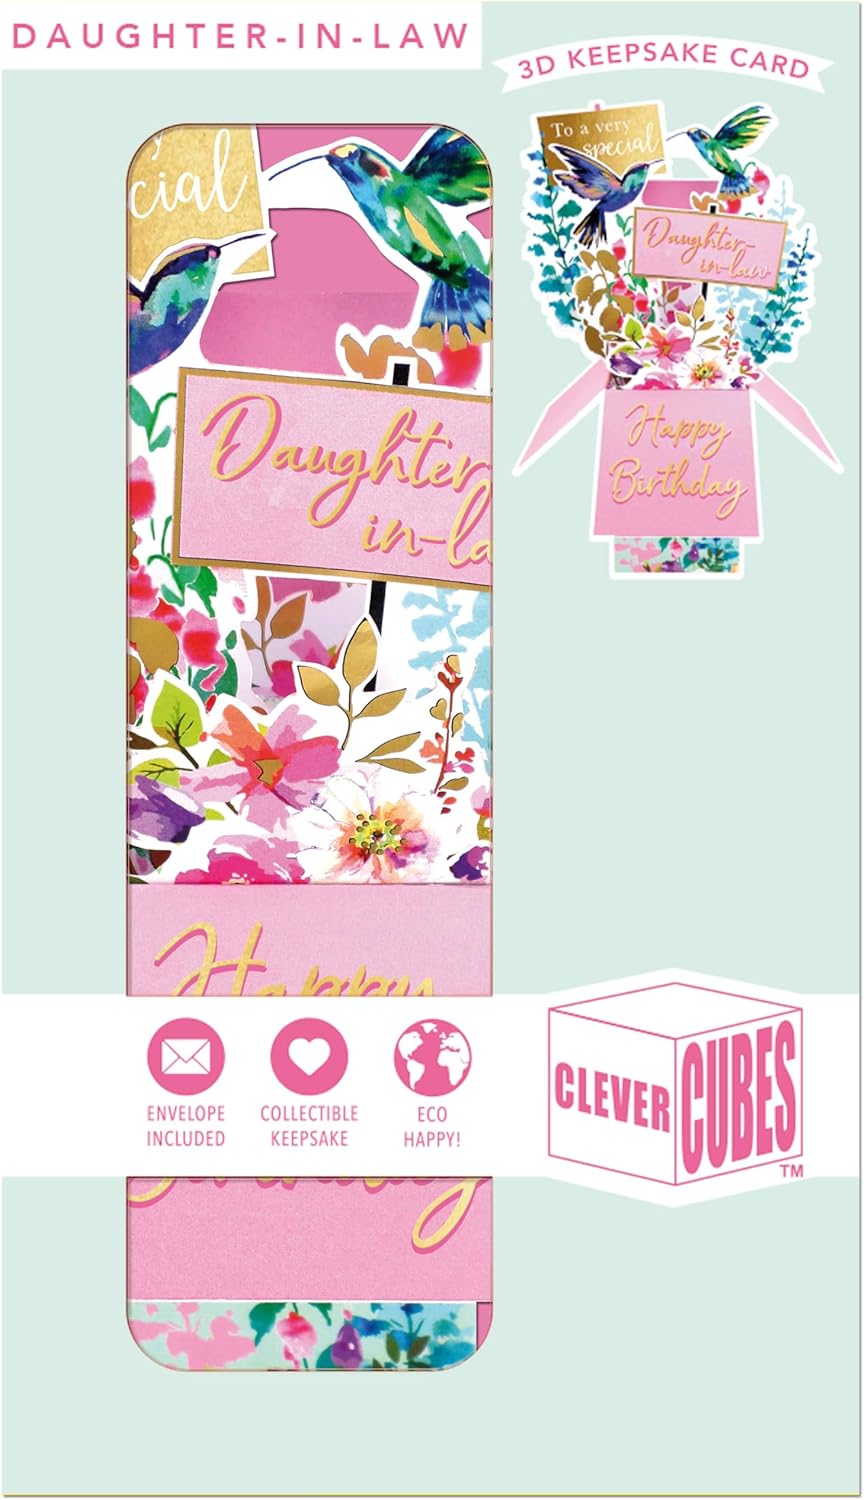 Clever Cube Special Daughter-In-Law Birthday Blooms Galore Pop Up Keepsake Card